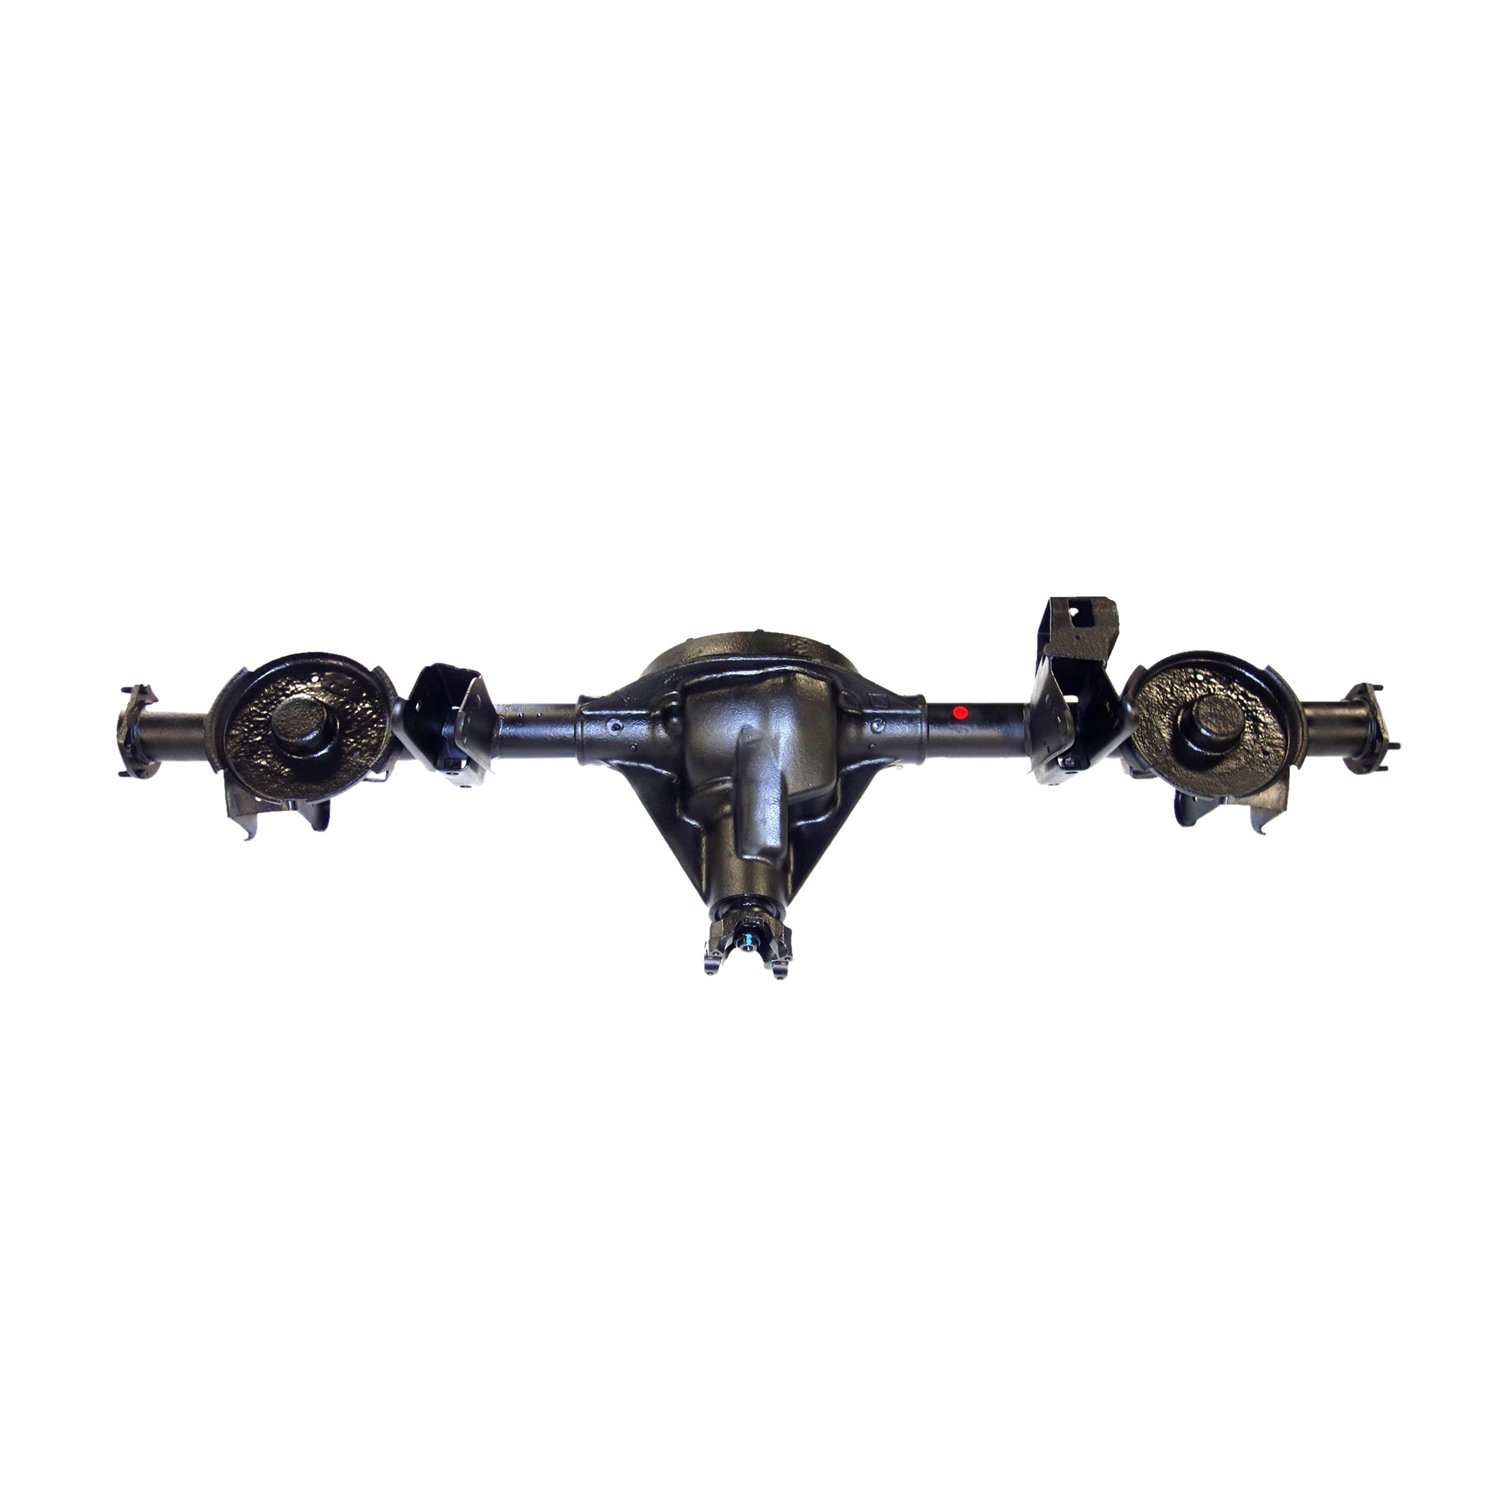 Remanufactured Complete Axle Assembly for Dana 35 97-02 Wrangler 3.07 , ABS, Posi LSD